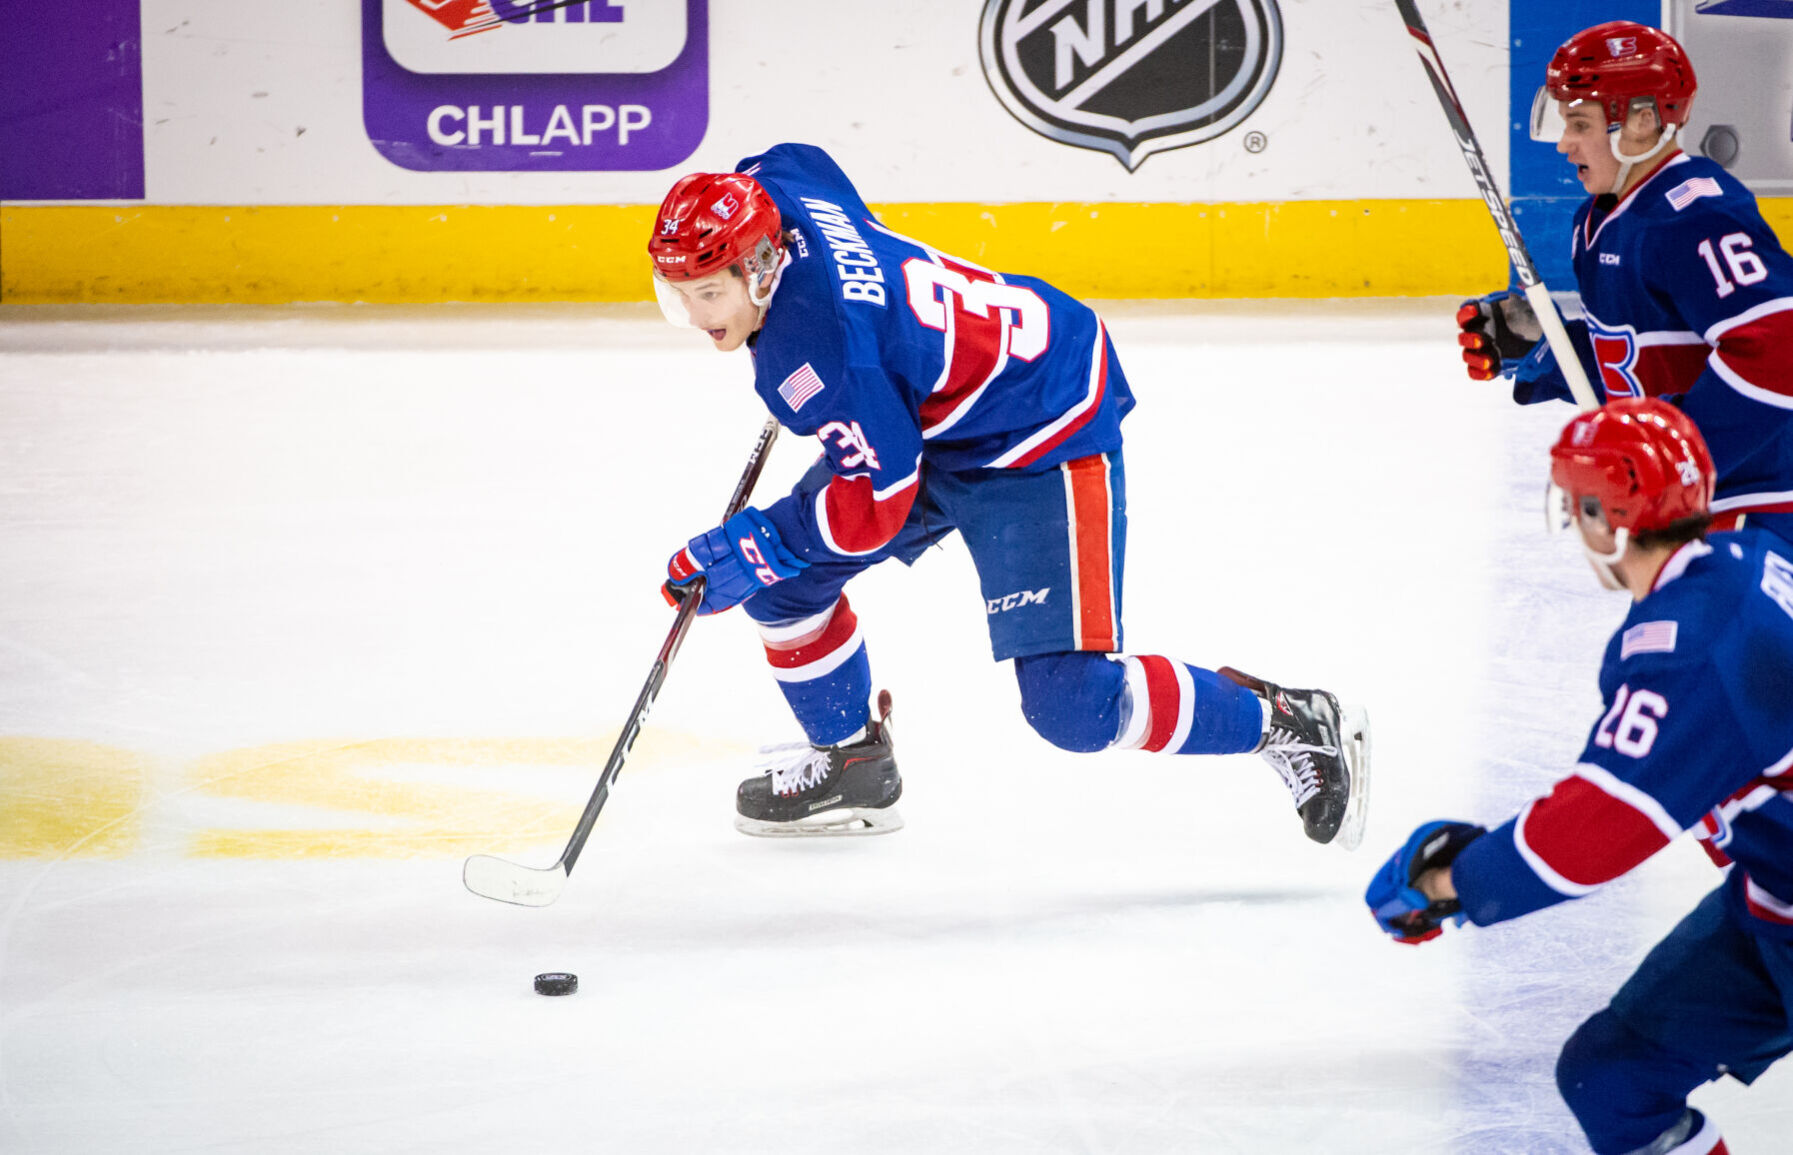 Spokane Chiefs season preview After a year off the ice, the Chiefs are ready to pick up where they left off Spokane Chiefs khq